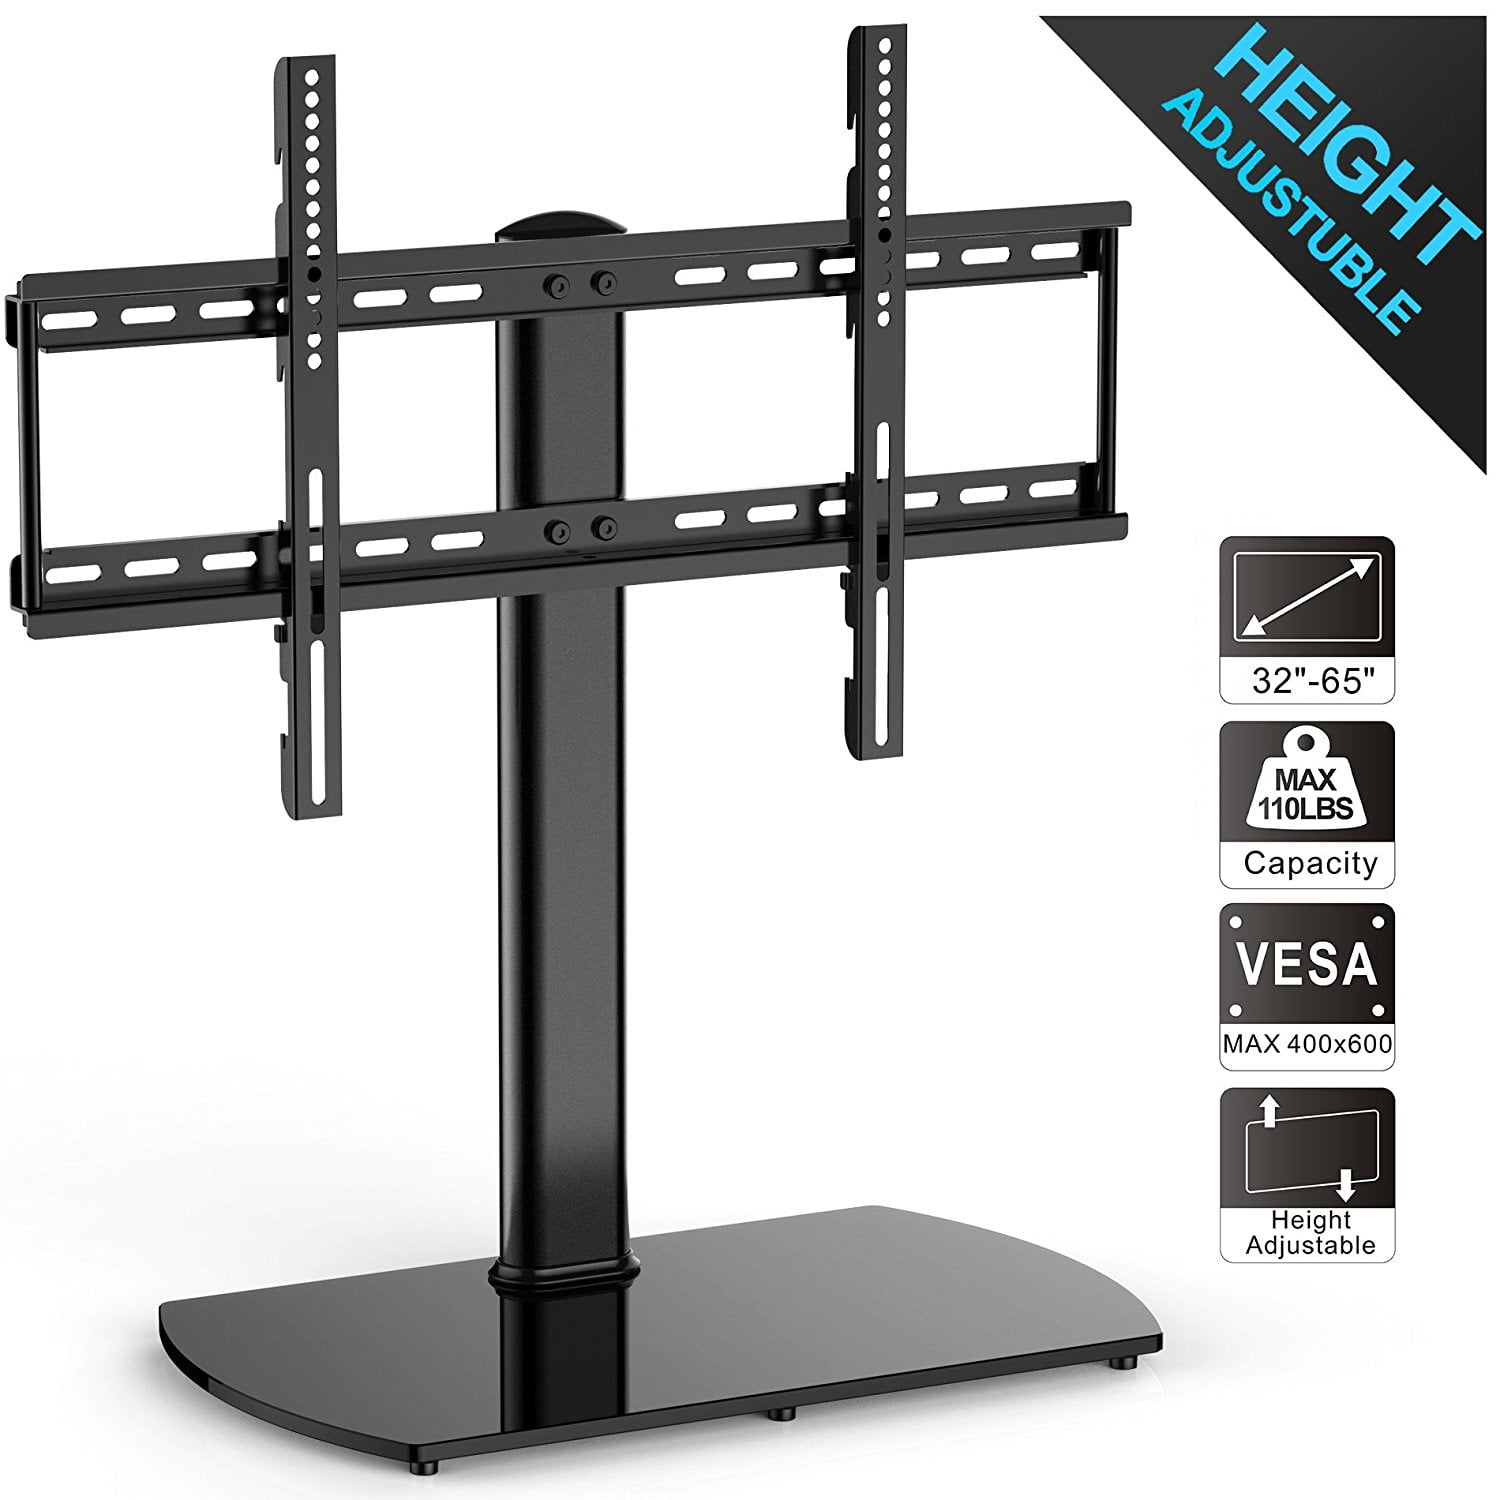 Details about   Heavy Duty Floor TV Stand Mount Pedestal Base for 32-65" Samsung LG Sony Vizio 